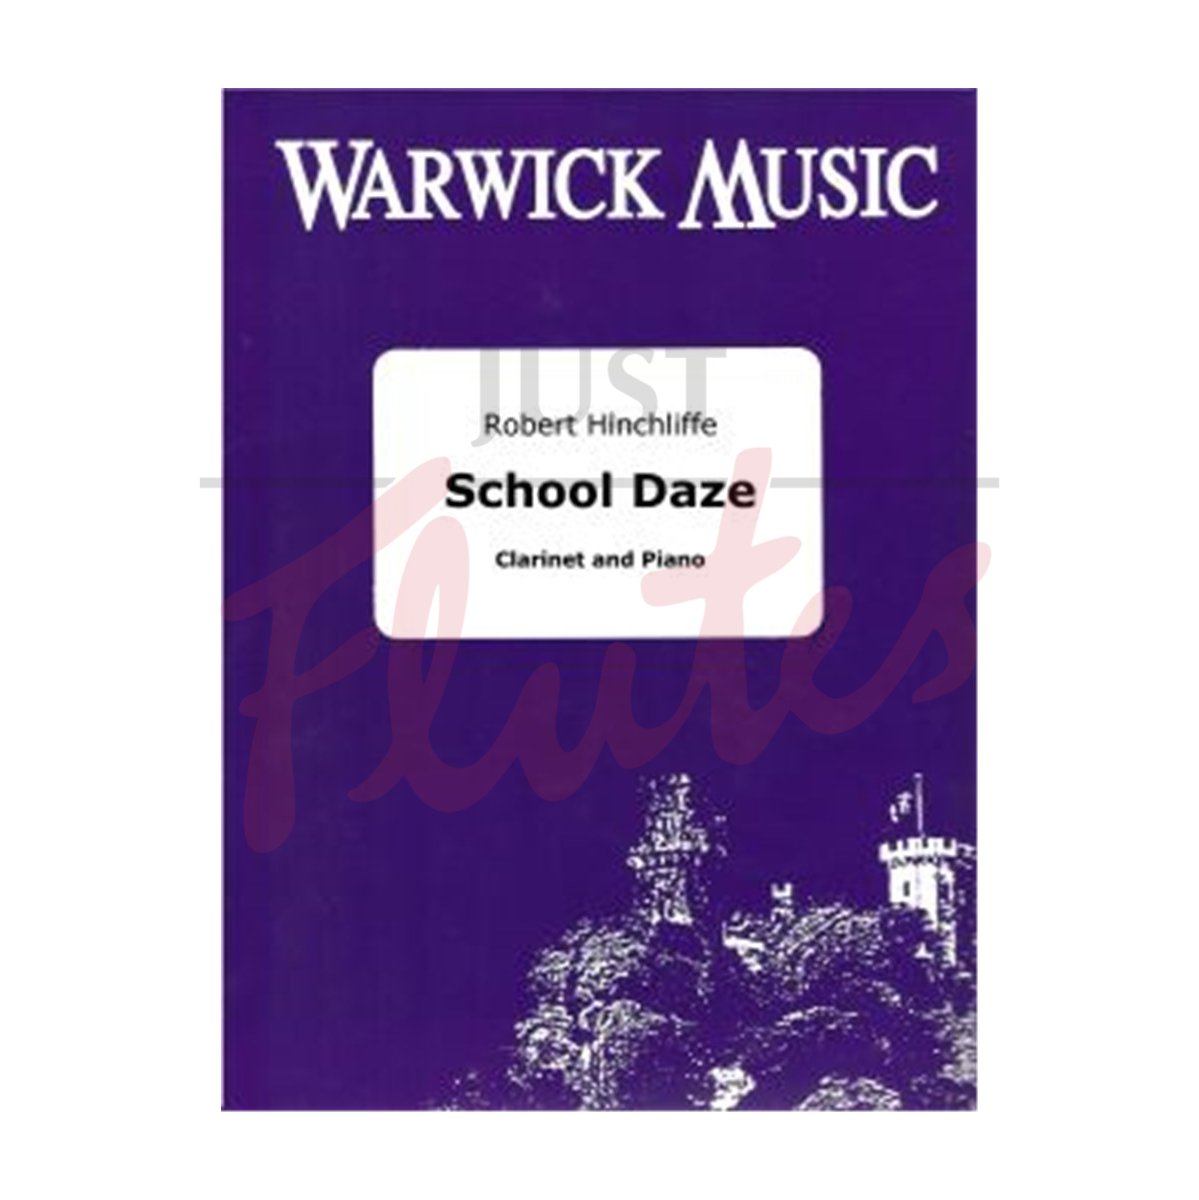 School Daze for Clarinet and Piano